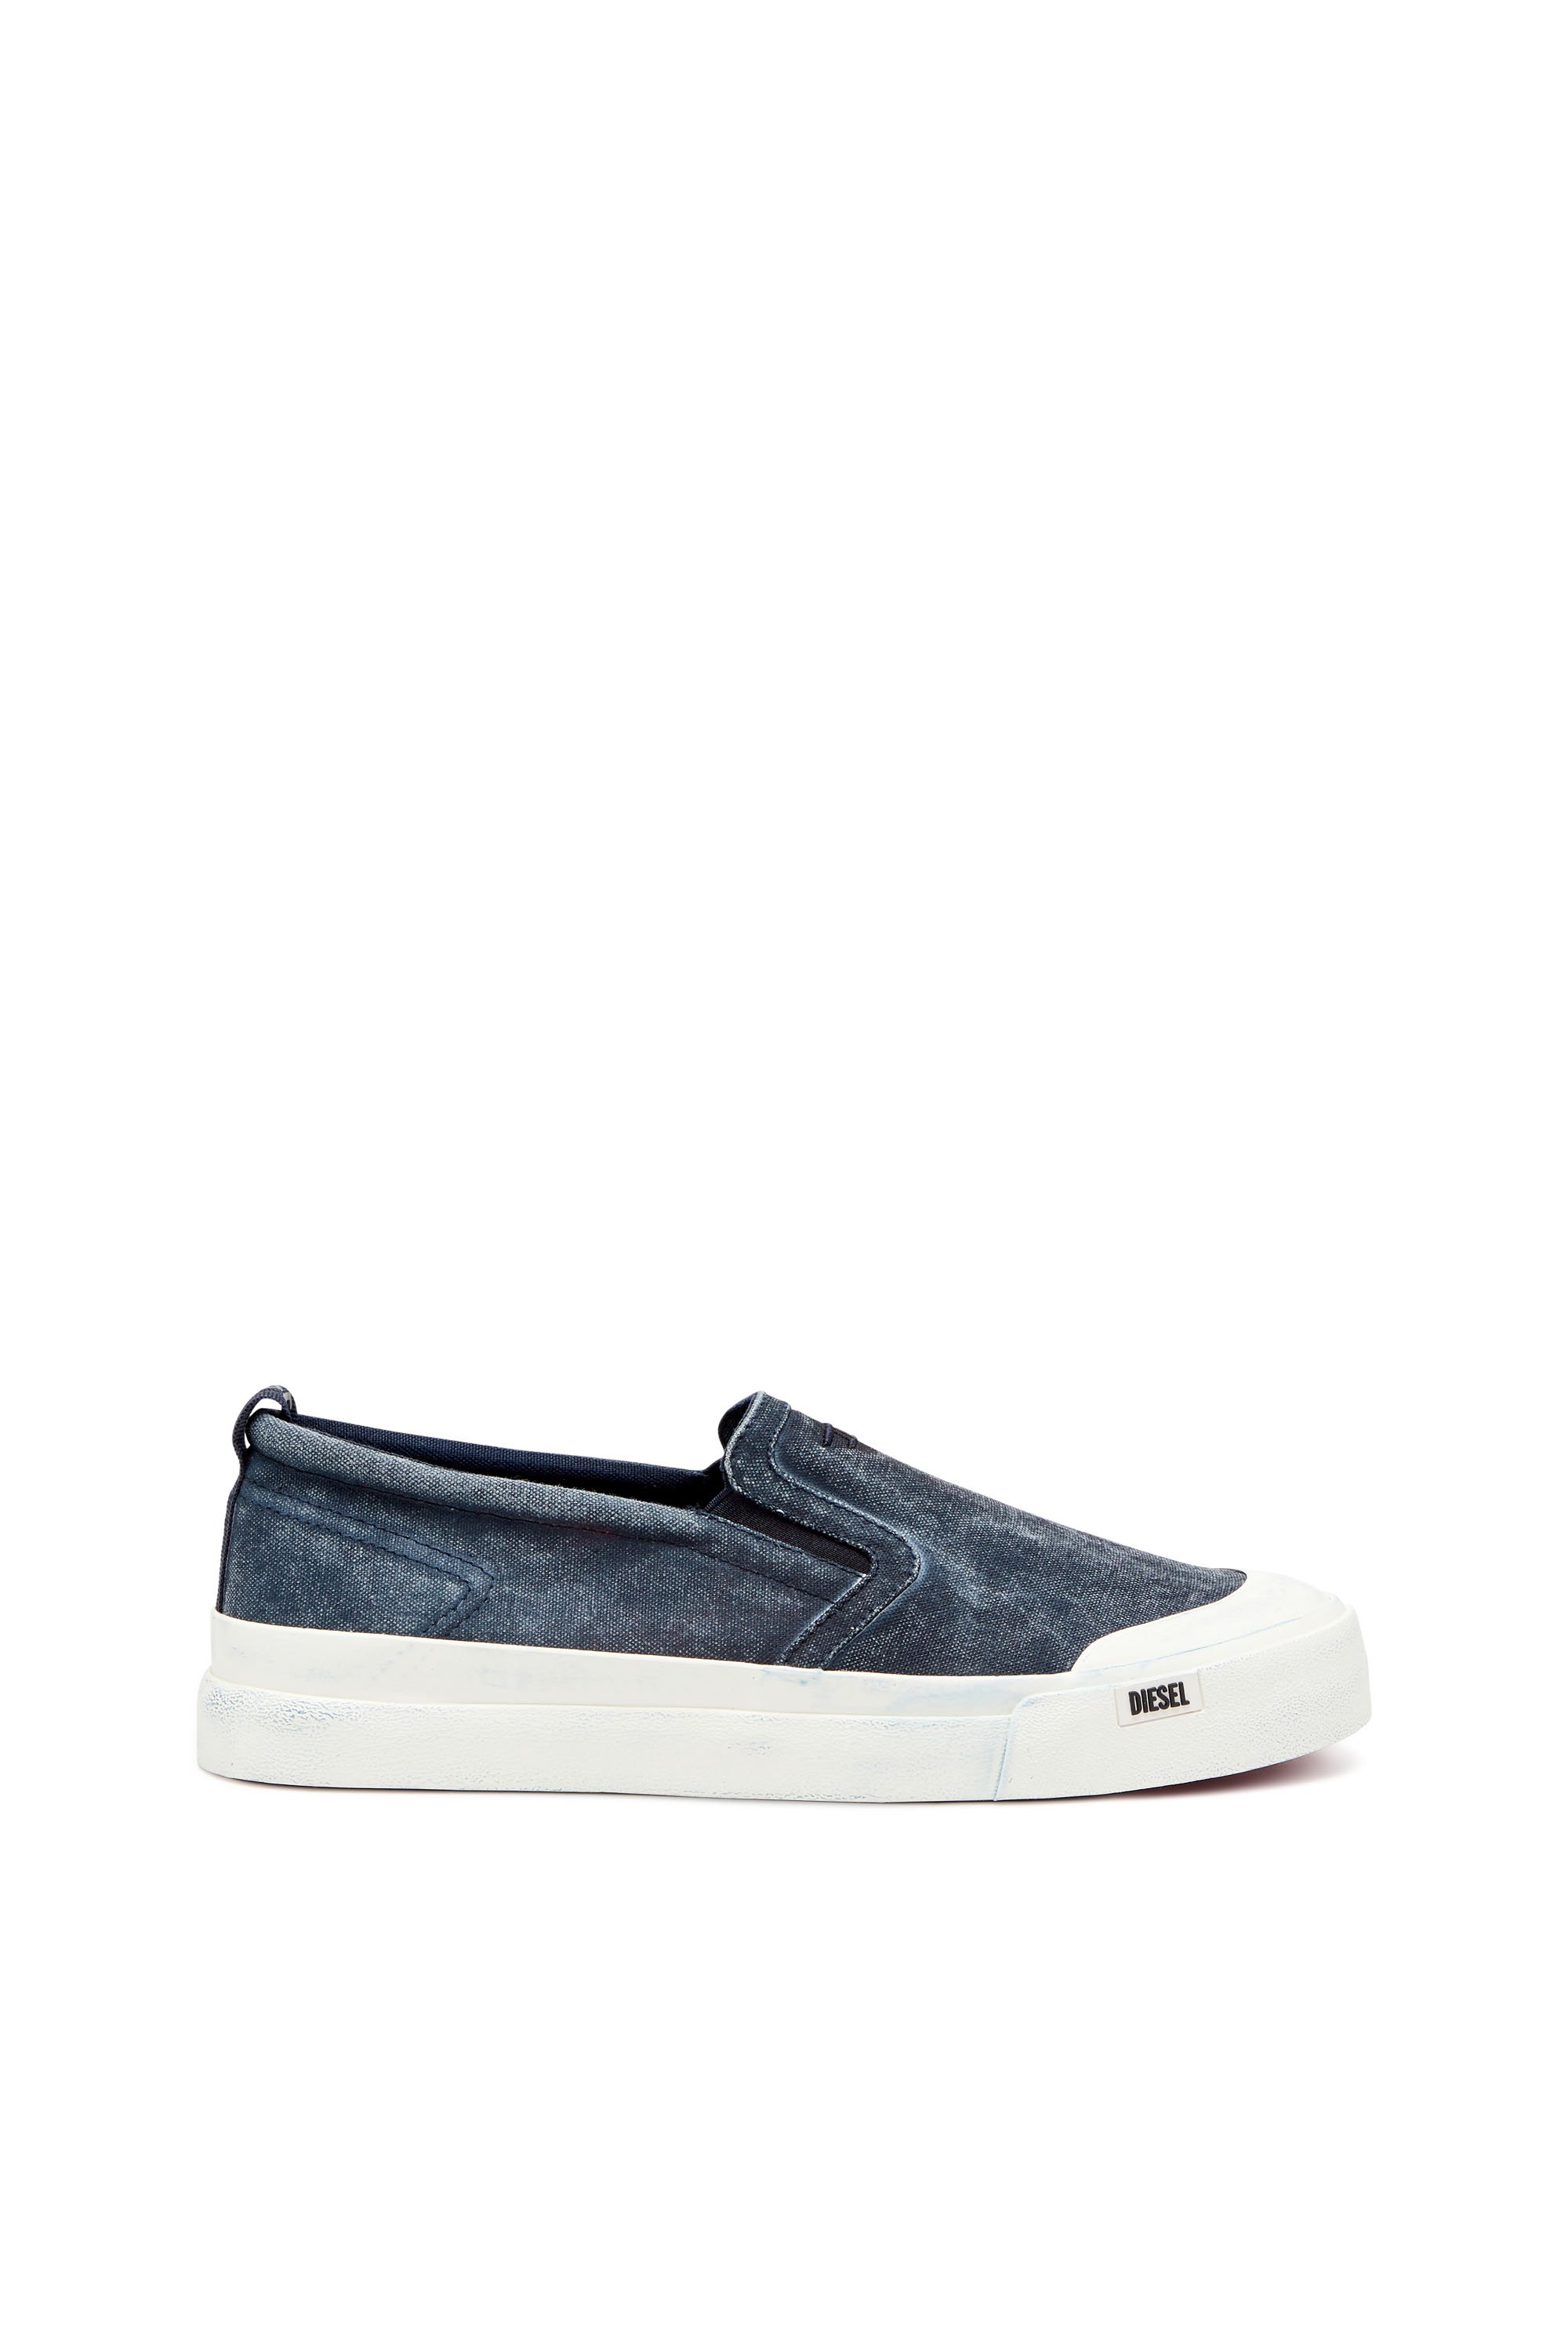 Diesel - S-ATHOS SLIP ON, Man Canvas slip-on sneakers with D embroidery in Blue - Image 1